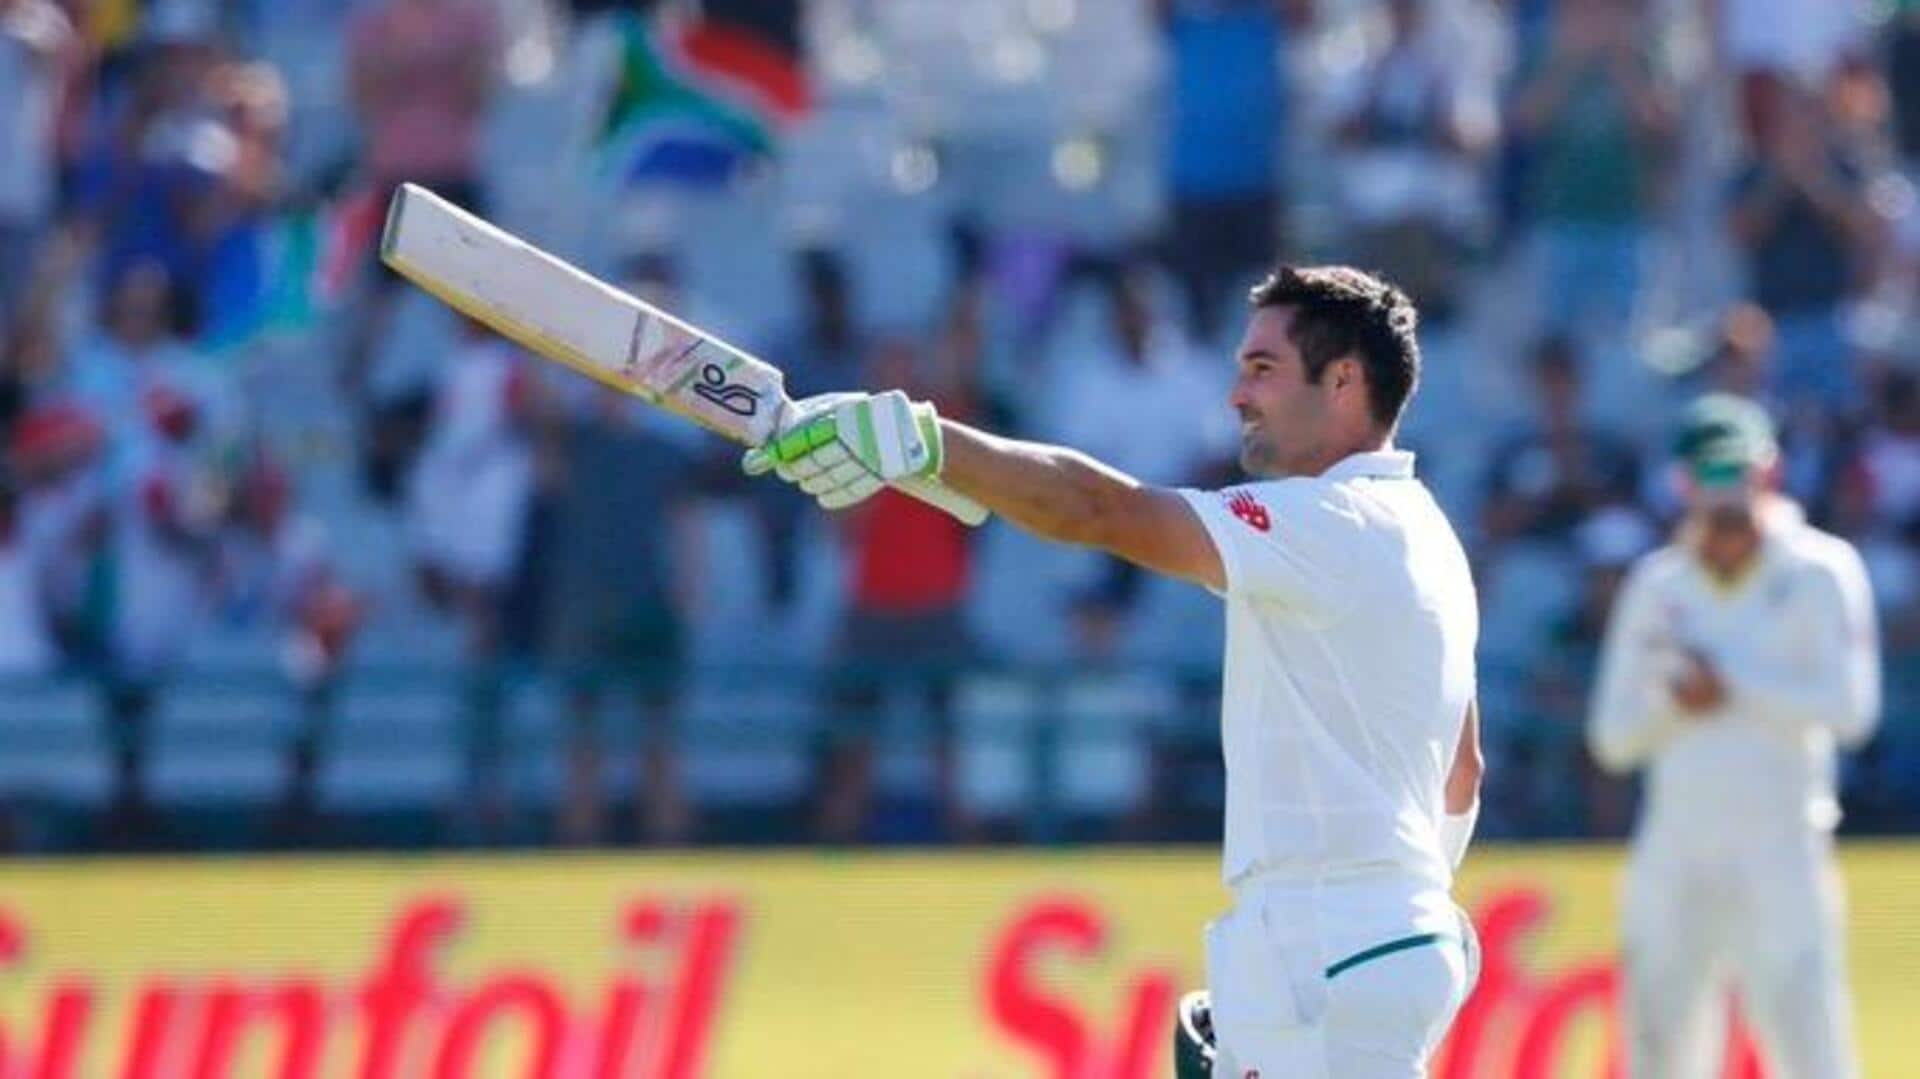 Dean Elgar averages 46.31 (Tests) in Cape Town: Key stats